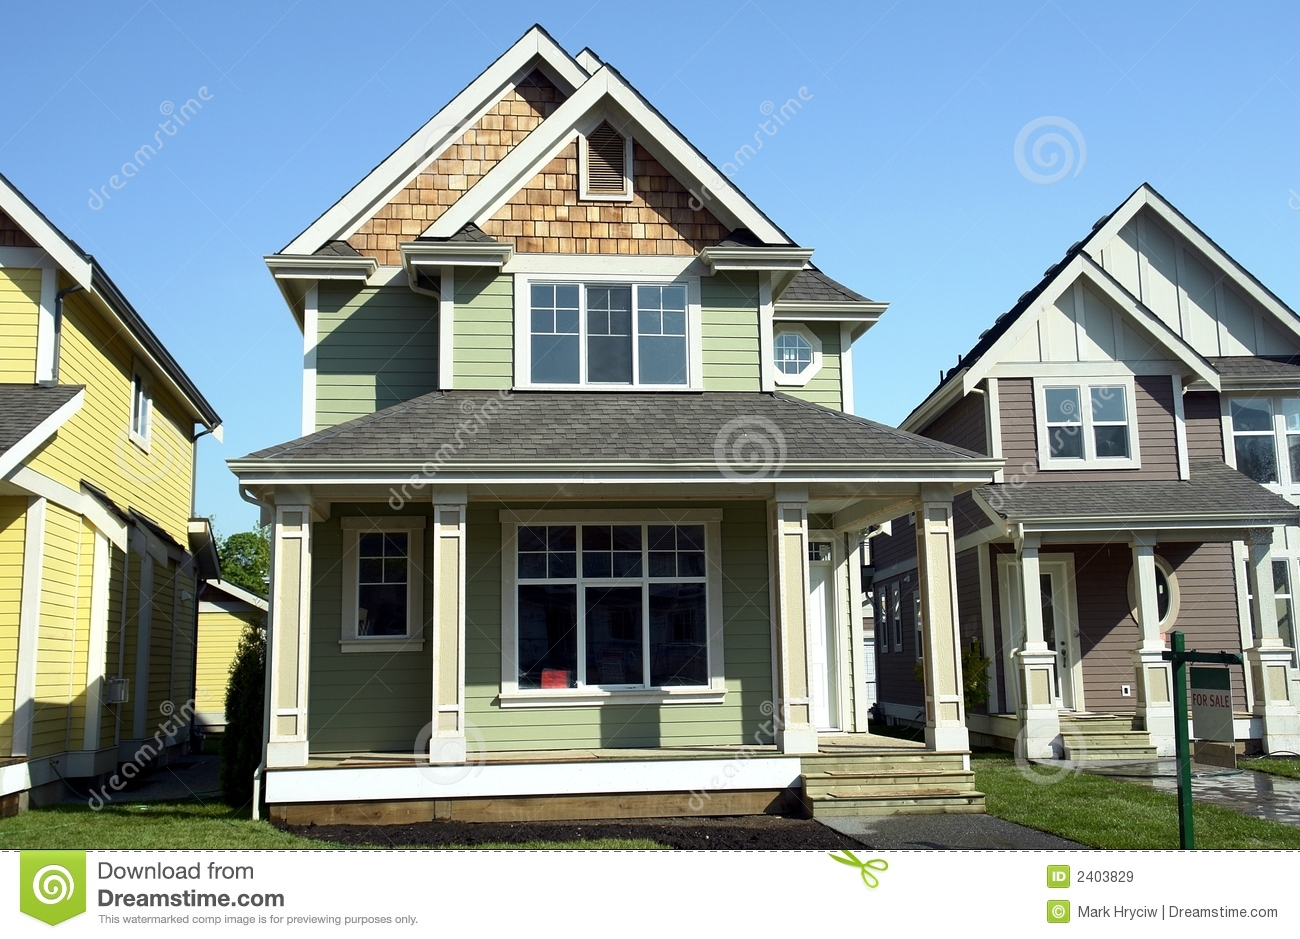 Free Stock Photos of Homes for Sale